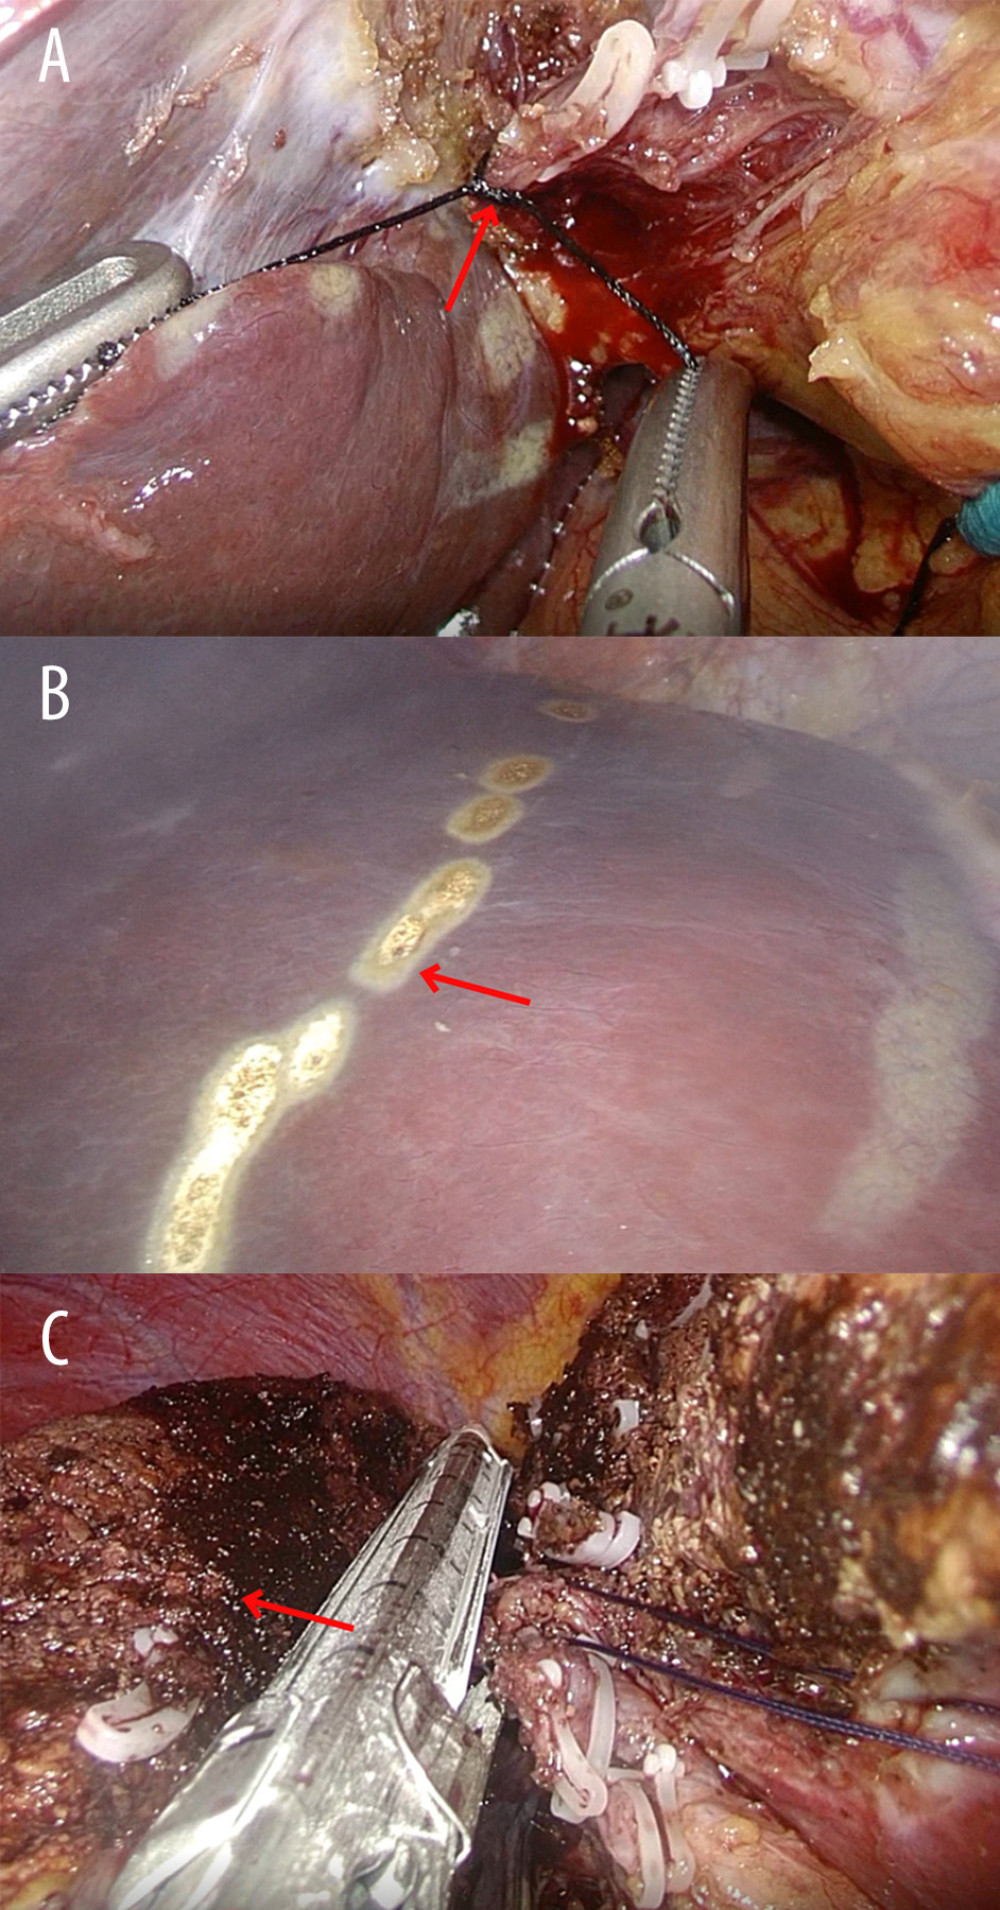 Intraoperative images of the laparoscopic right hemi-hepatectomy. (A) The right hepatic hilar was controlled (red arrow). (B) The resection guideline was based on the ischemic boundary (red arrow). (C) The hepatic parenchyma was transected and the right hemi-liver (red arrow) removed.